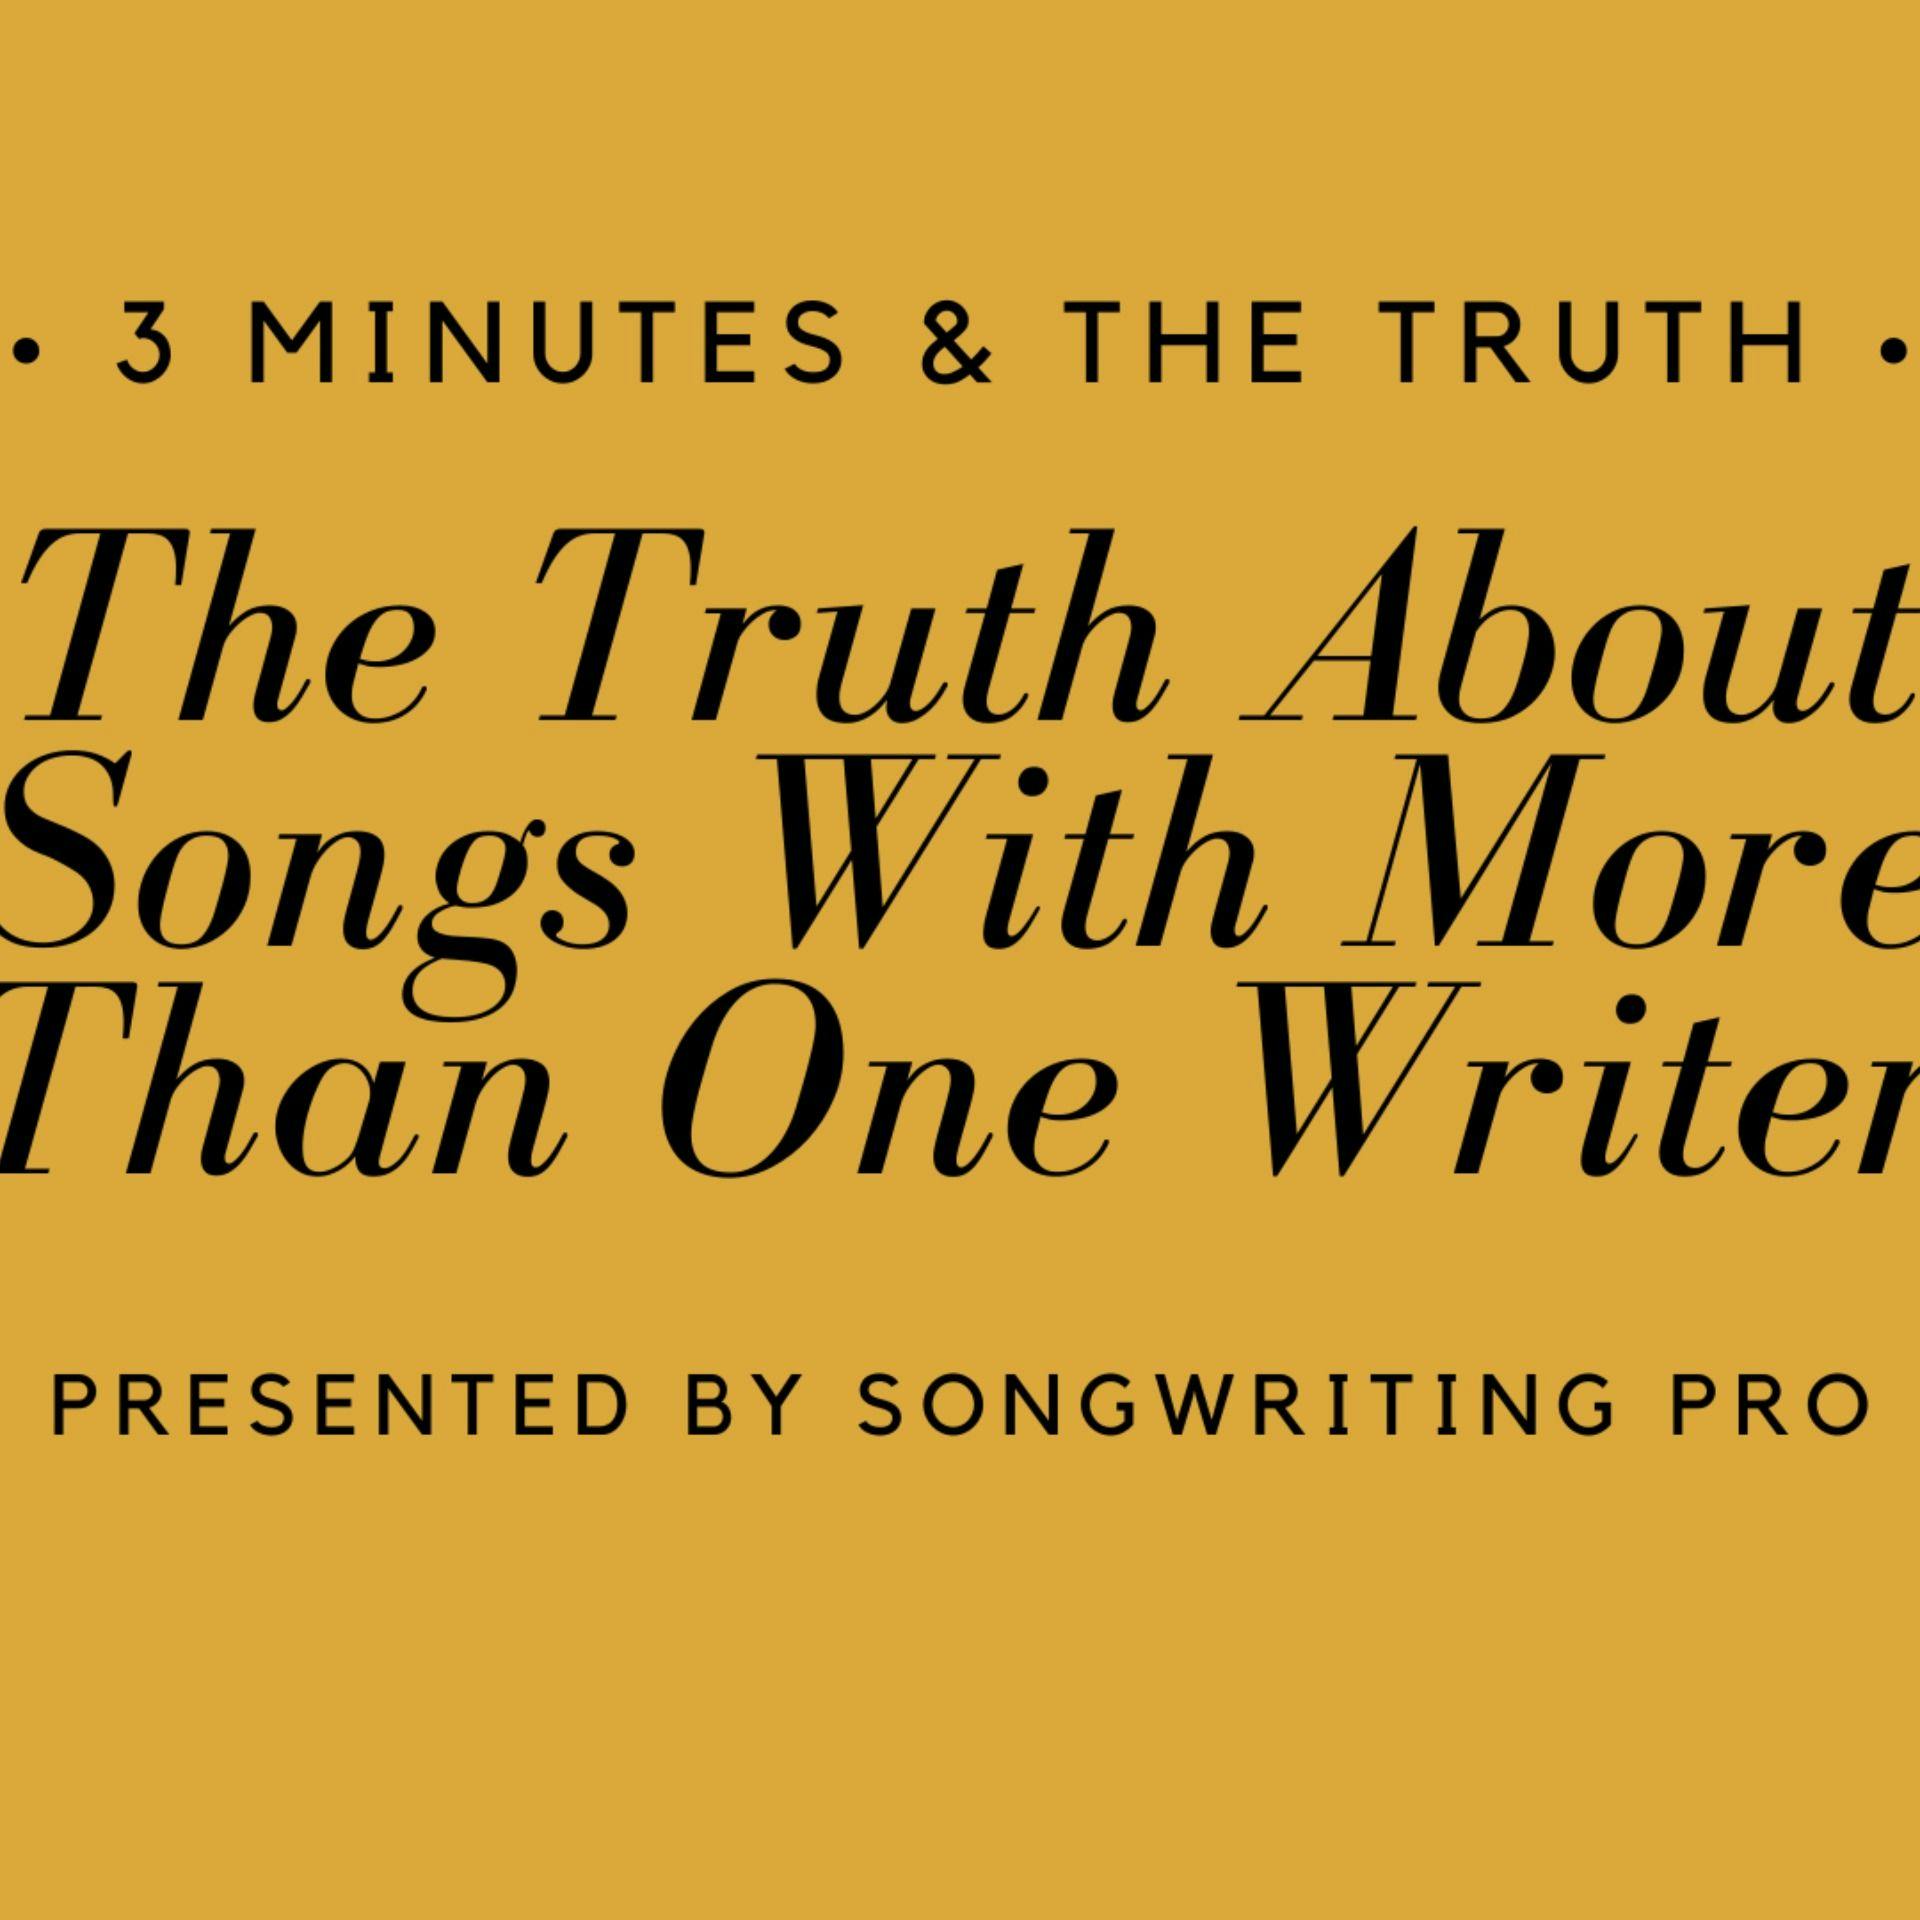 3 Minutes & The Truth: About Multiple Songwriters